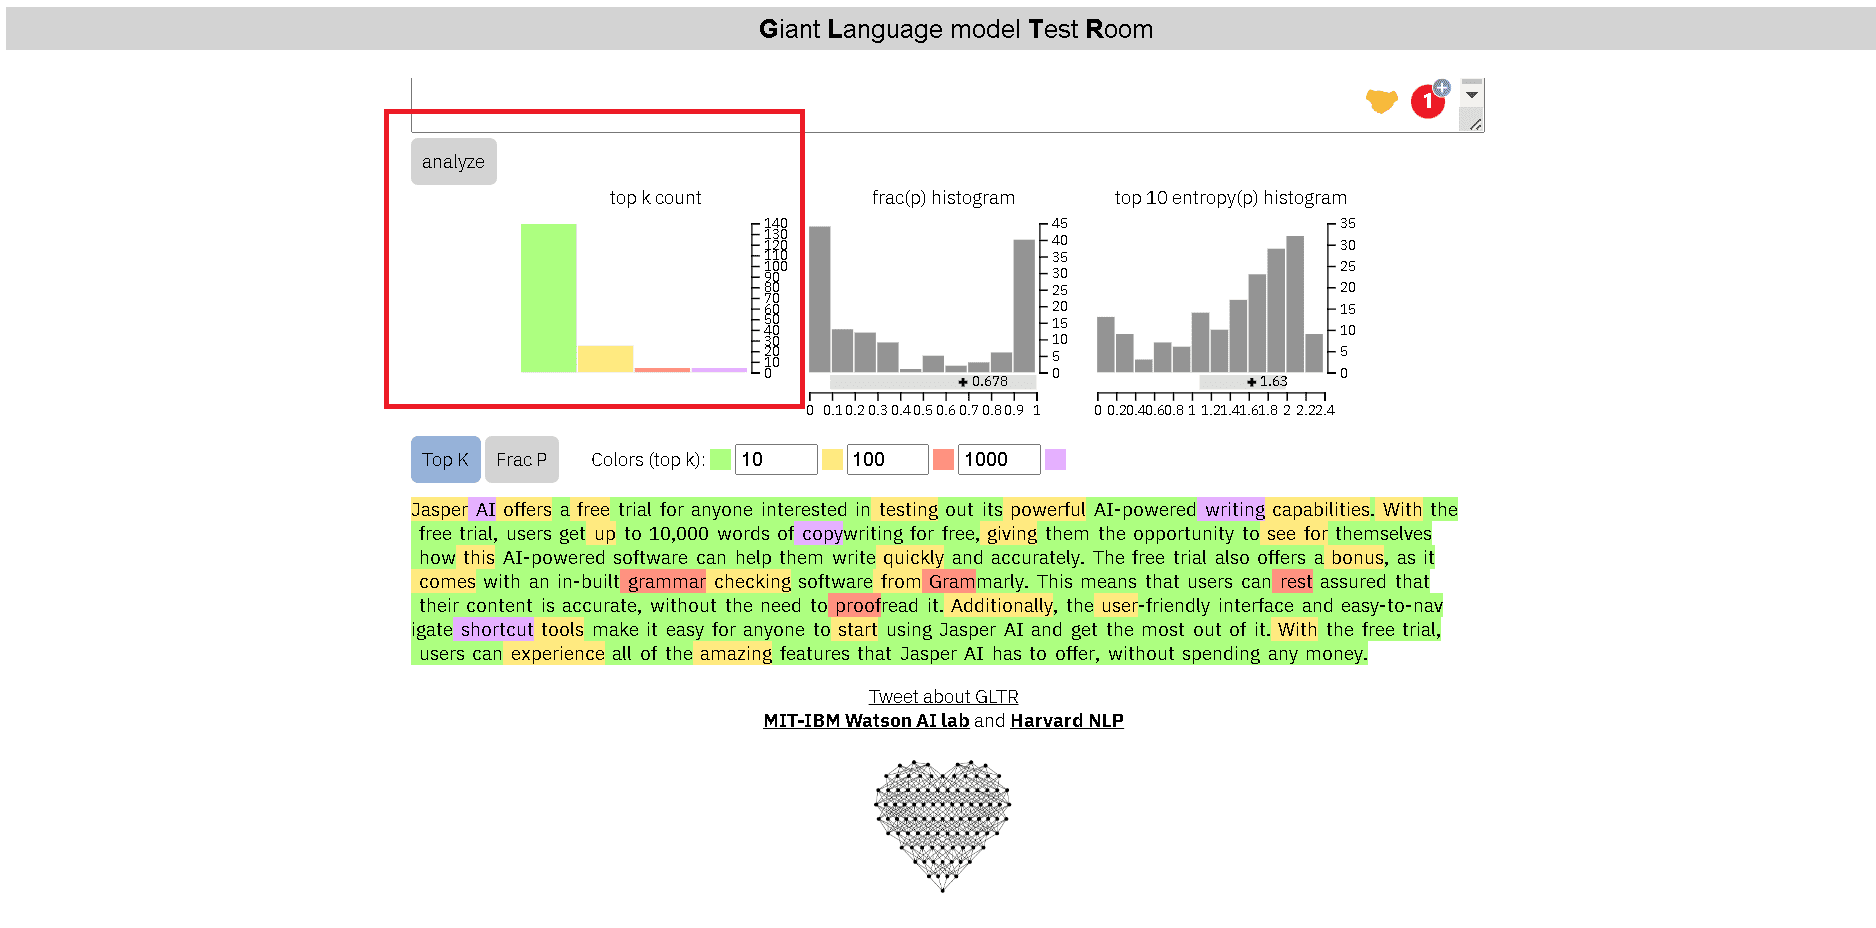 GLTR detects AI content, especially GPT-2